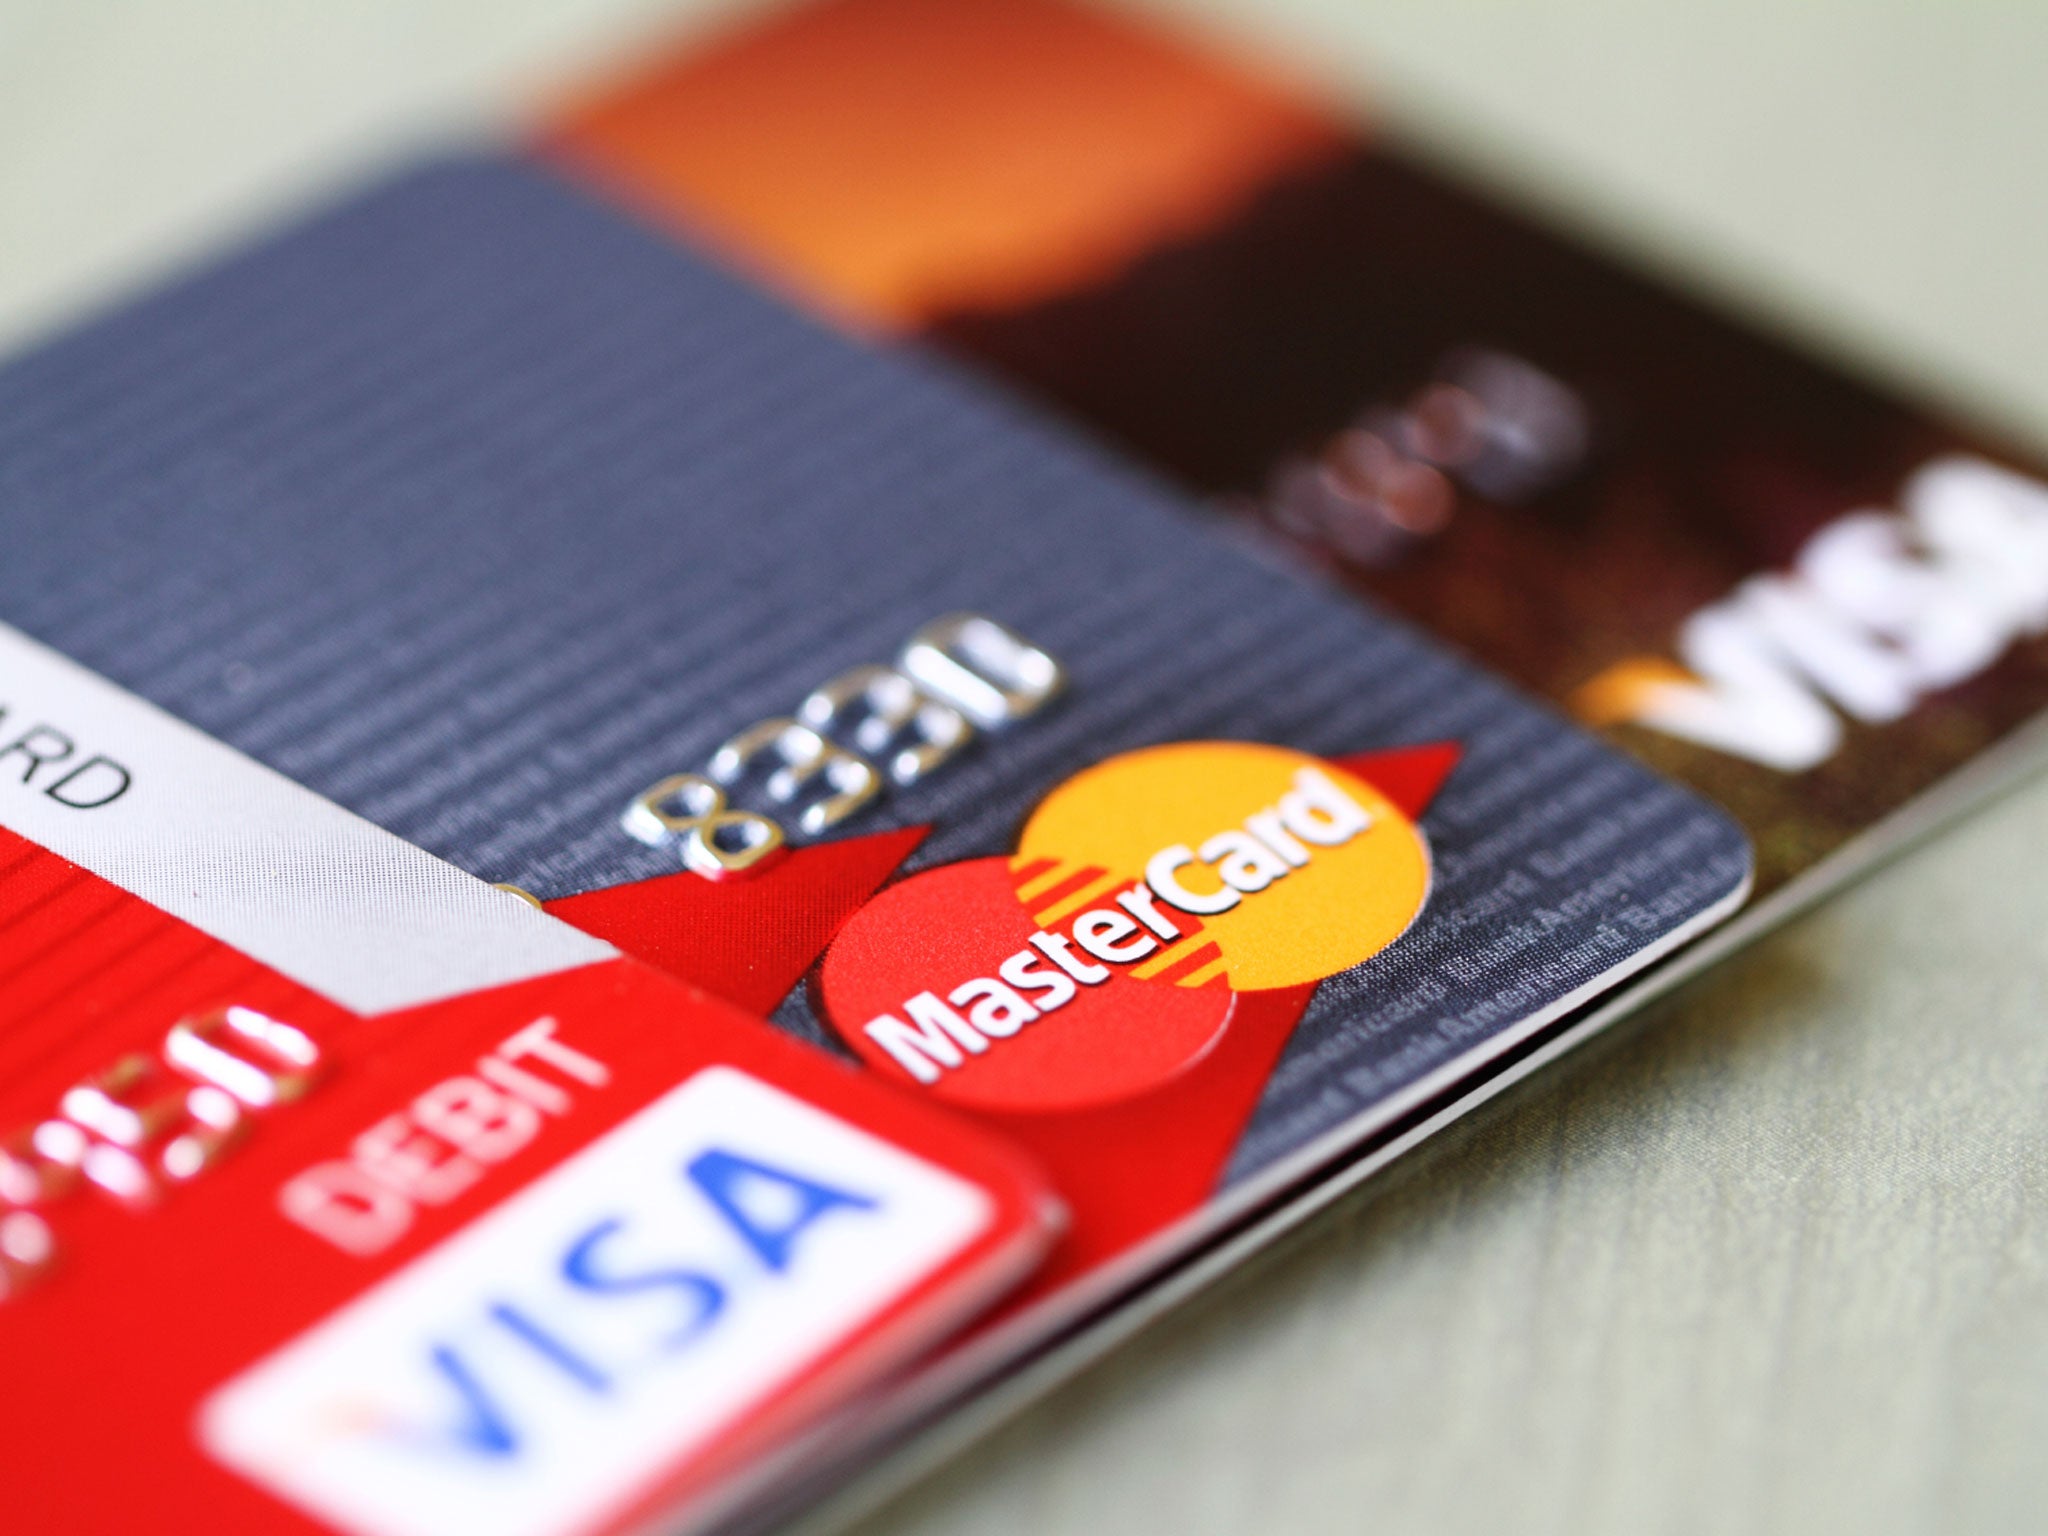 The research shows that on average, credit card holders were given rises of £1,481 without being asked